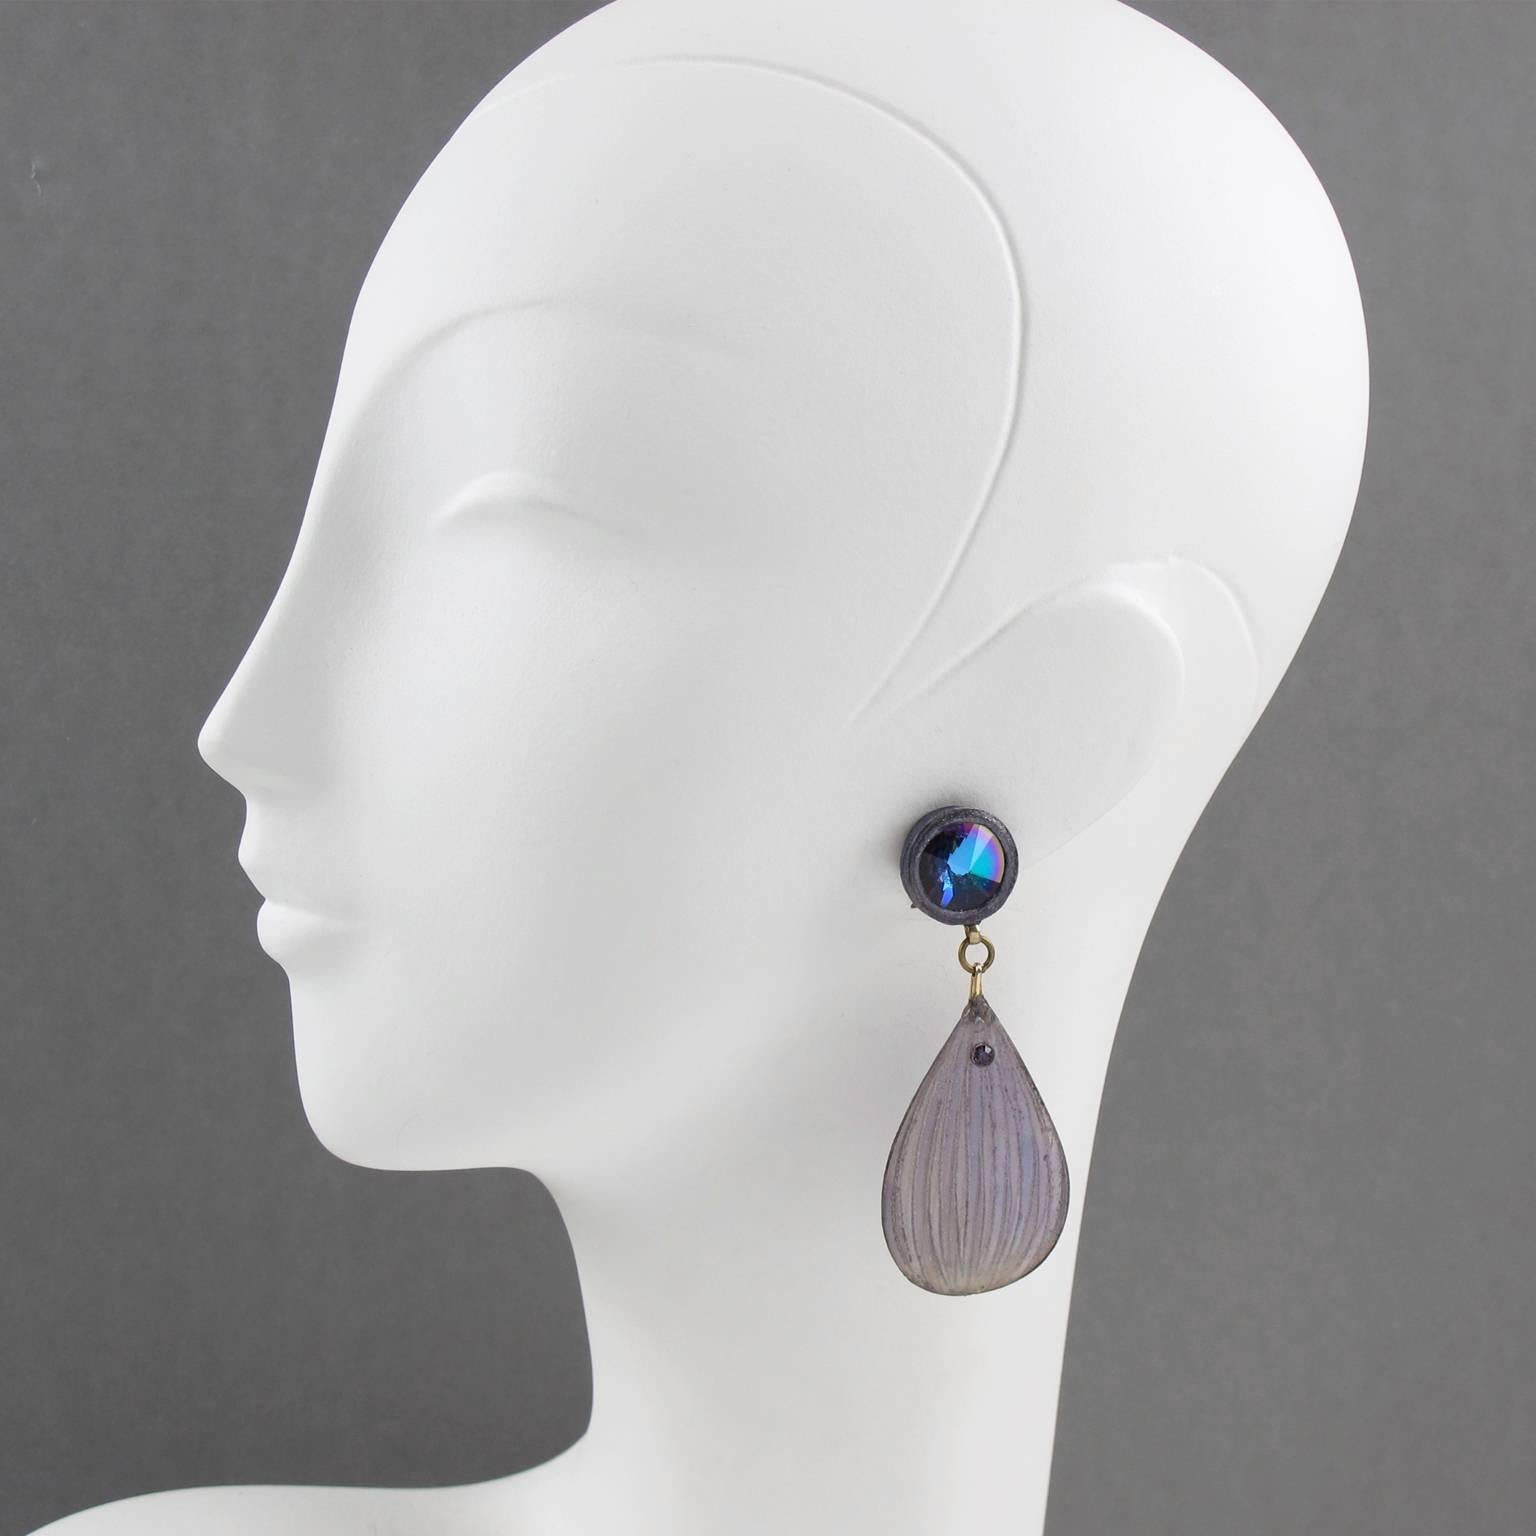 Lovely vintage Monique Vedie Talosel resin clip on earrings. Featuring floral dangling shape with carved dimensional large drop with textured pattern in light purple color, topped with large faceted glass cabochon in blue iridescent color. French